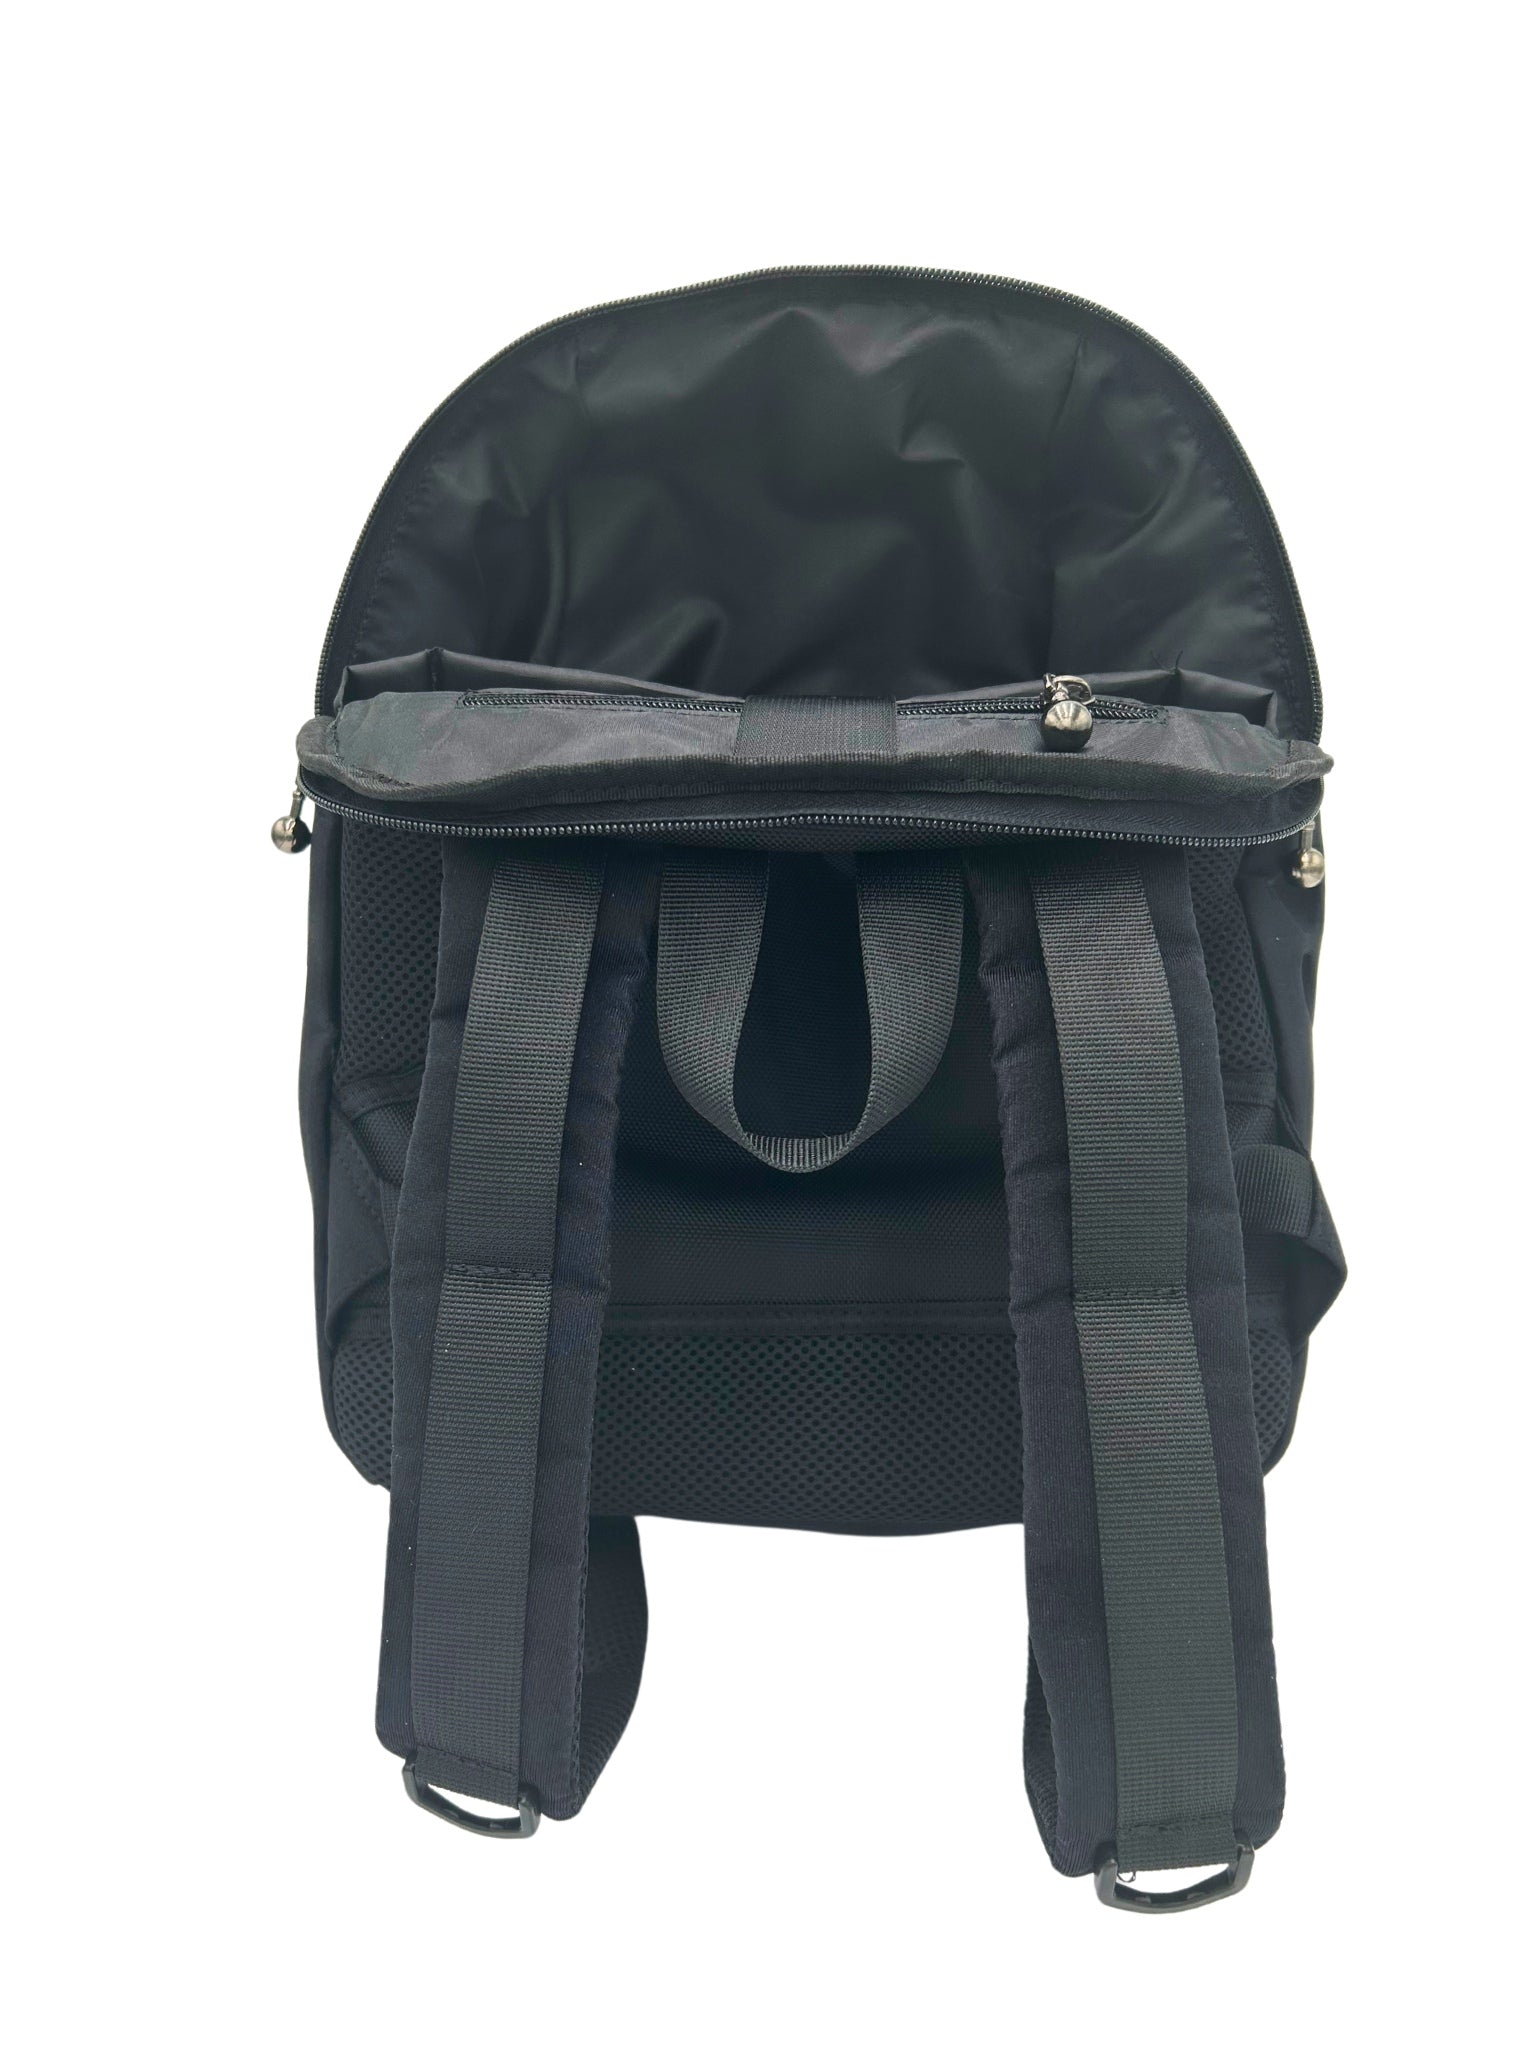 Black Daypack | Eclipse by Madapx Inside View